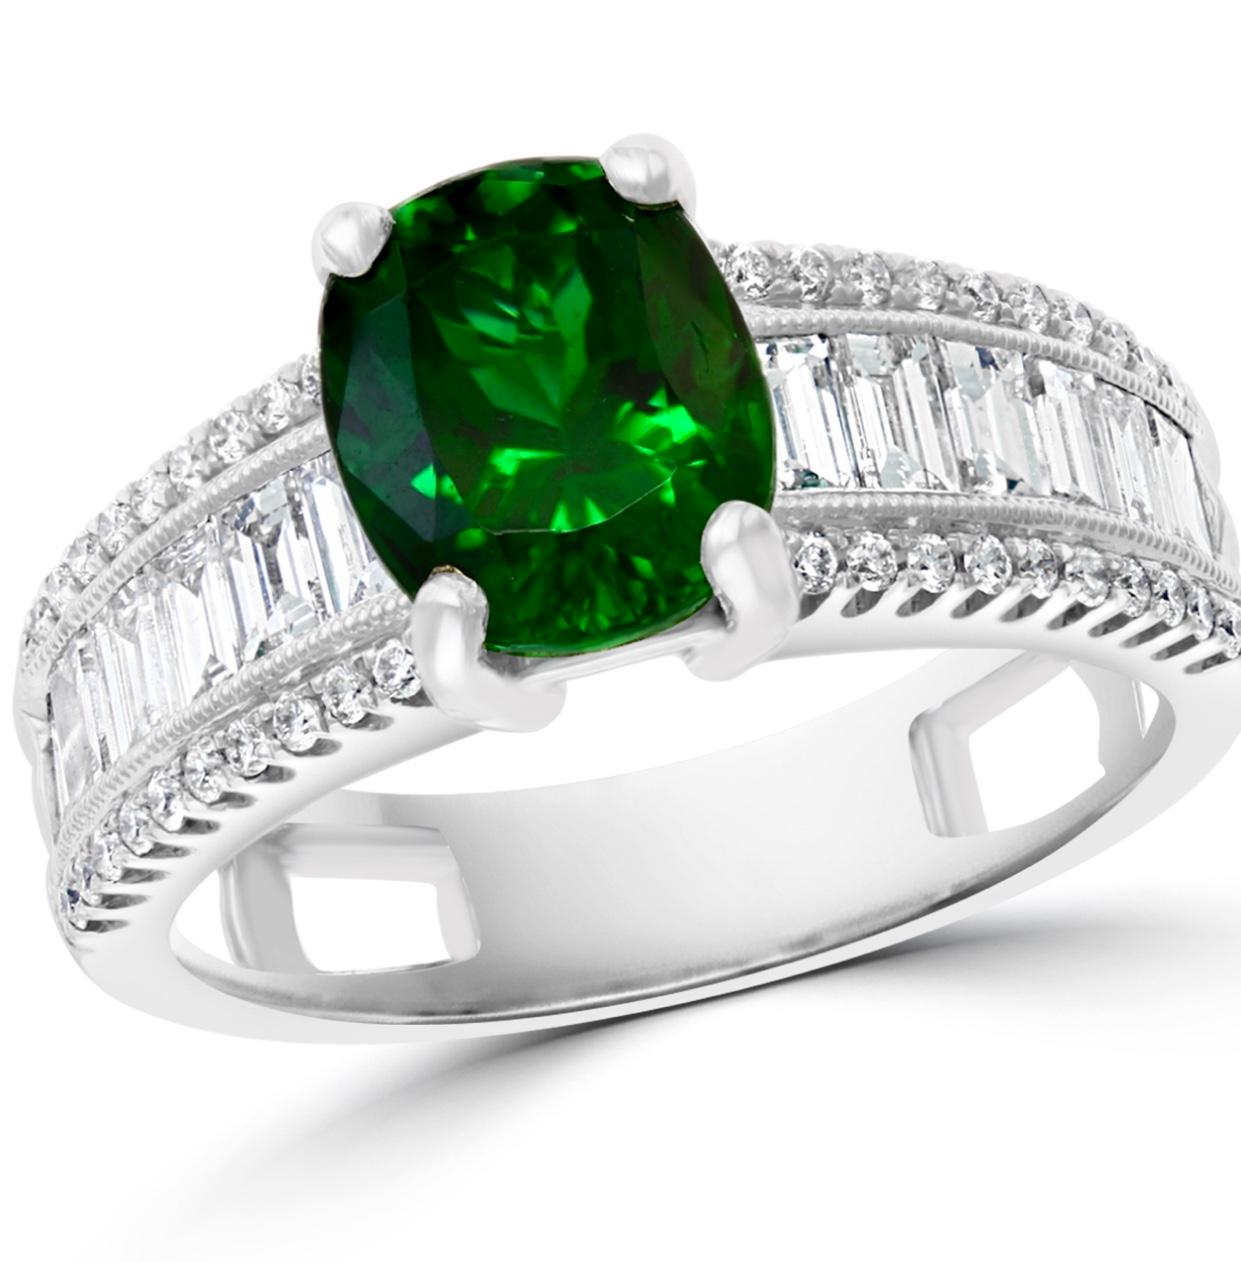 1.8 Carat Oval Tsavorite and 1.5 Carat Diamond in 14 Karat Gold Ring Estate In Excellent Condition For Sale In New York, NY